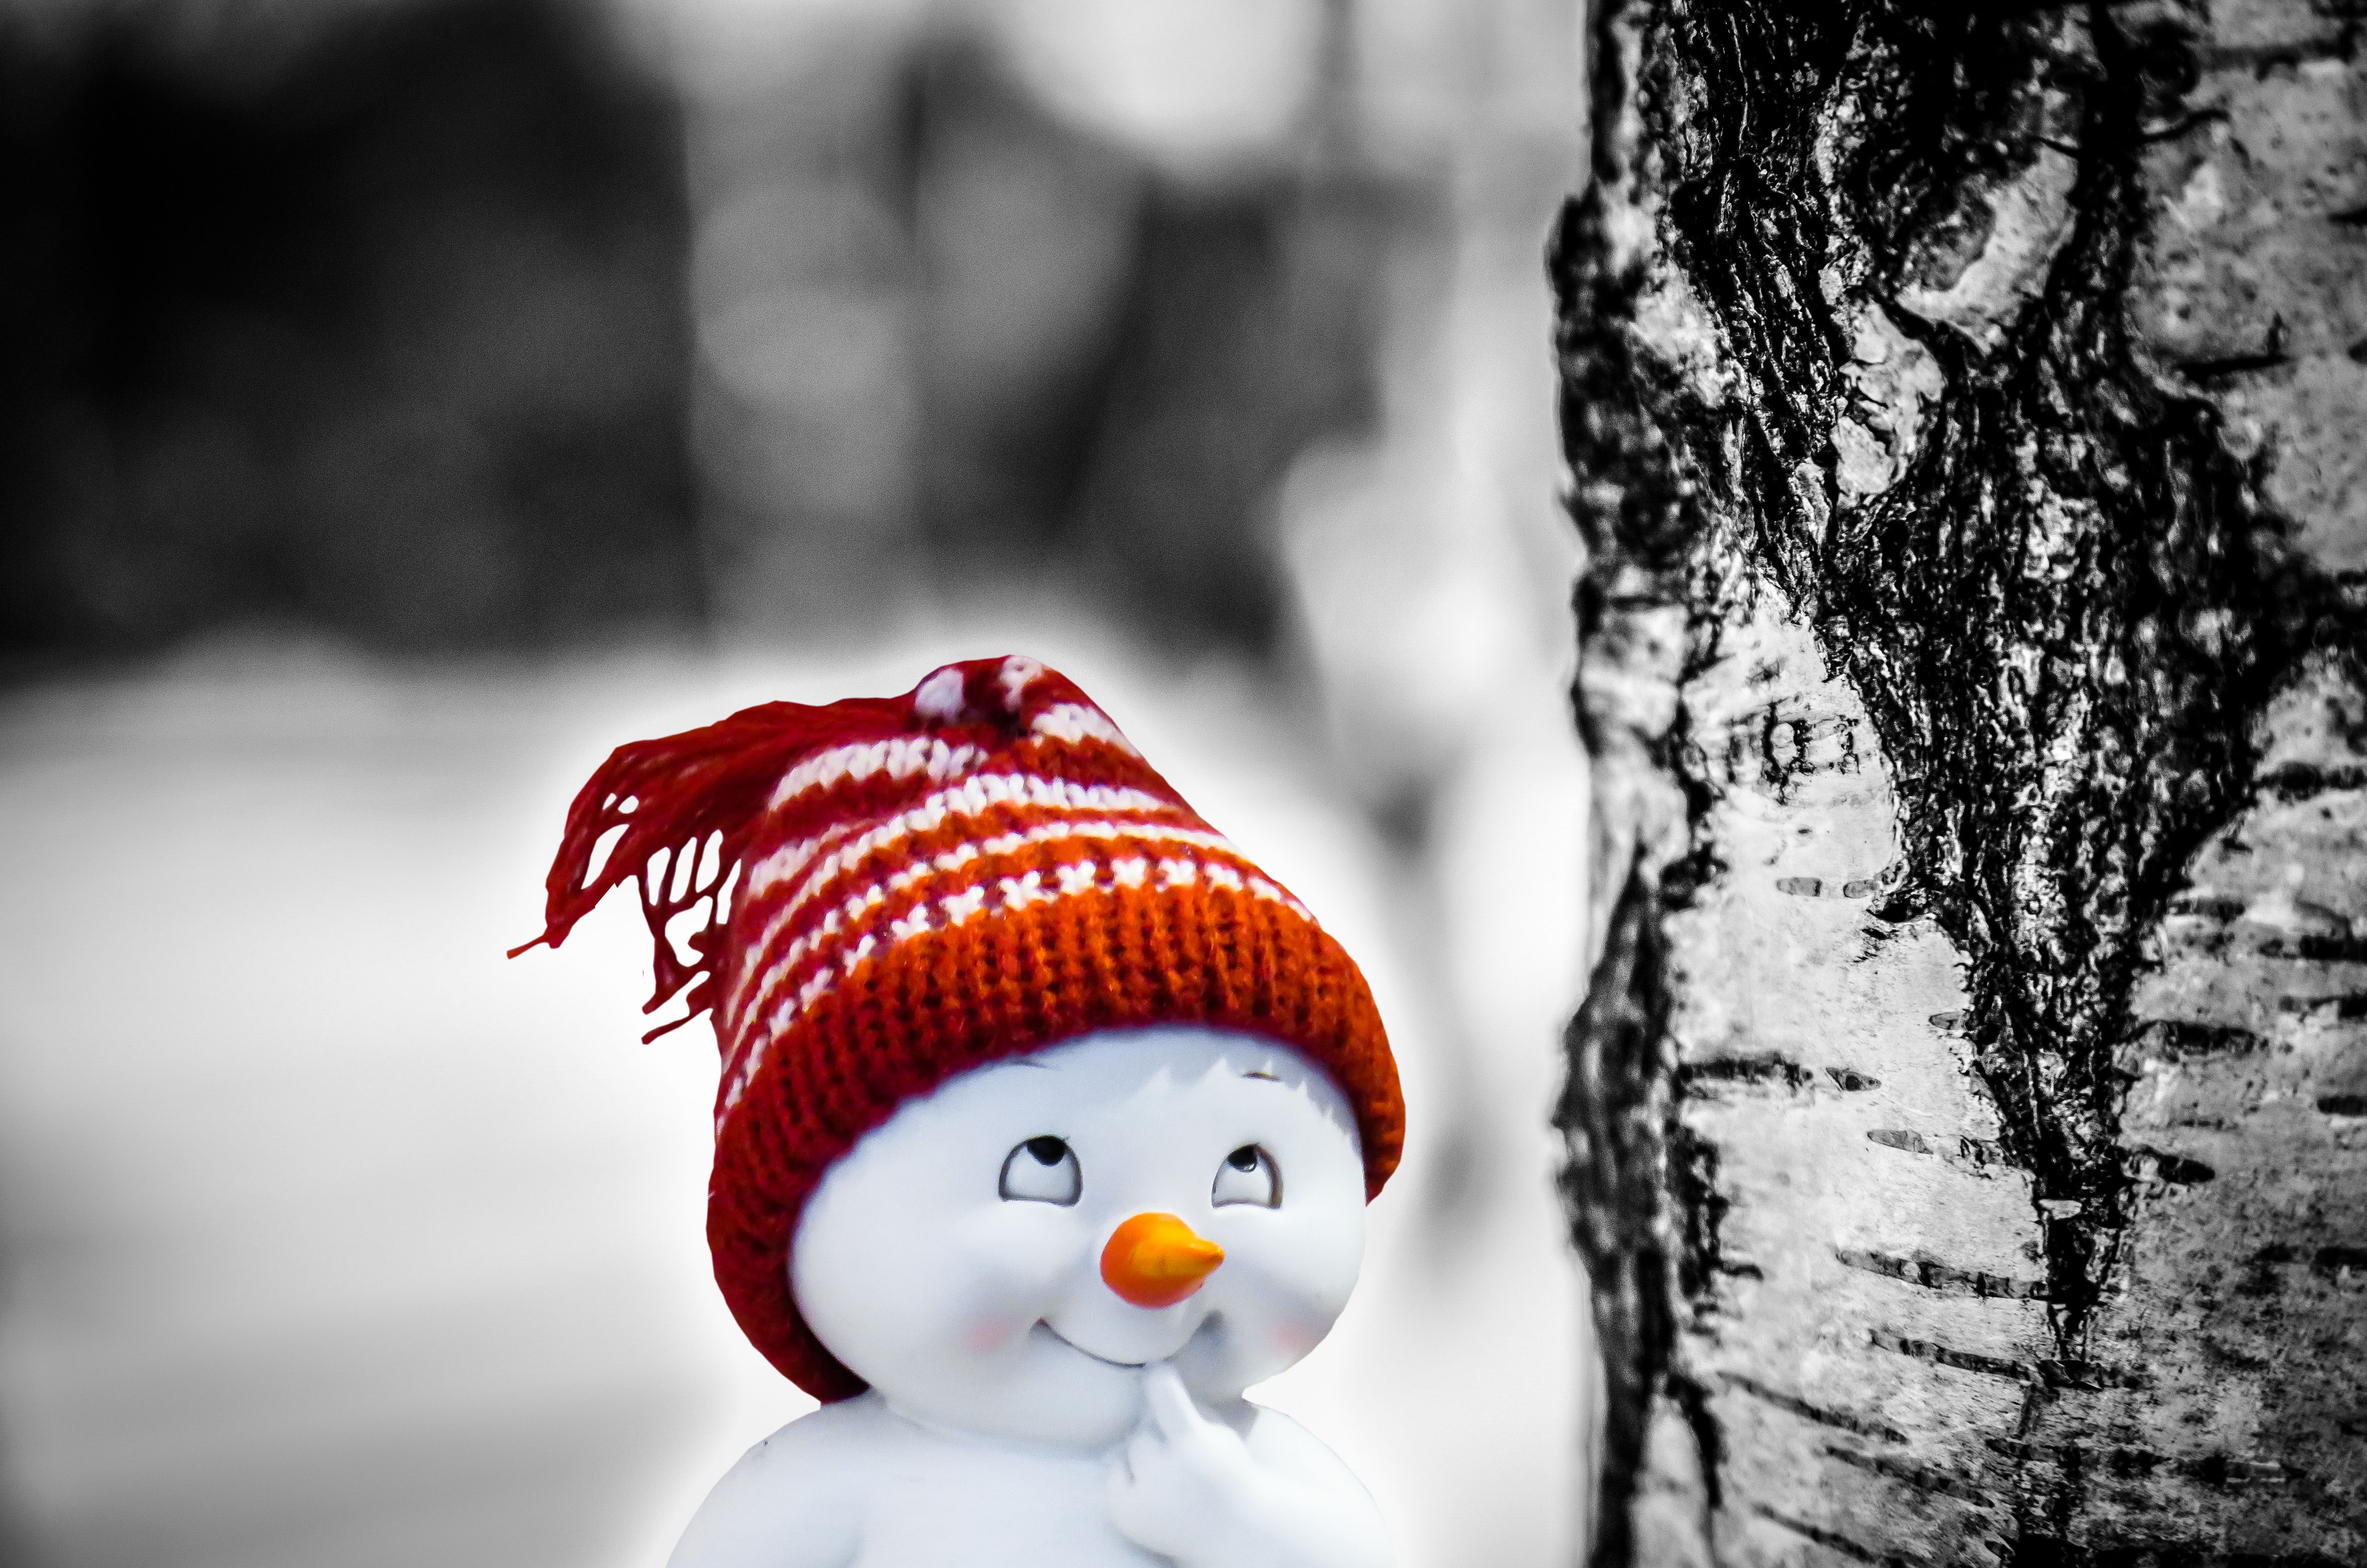 Snowman Smile Red Hat Free Image Download